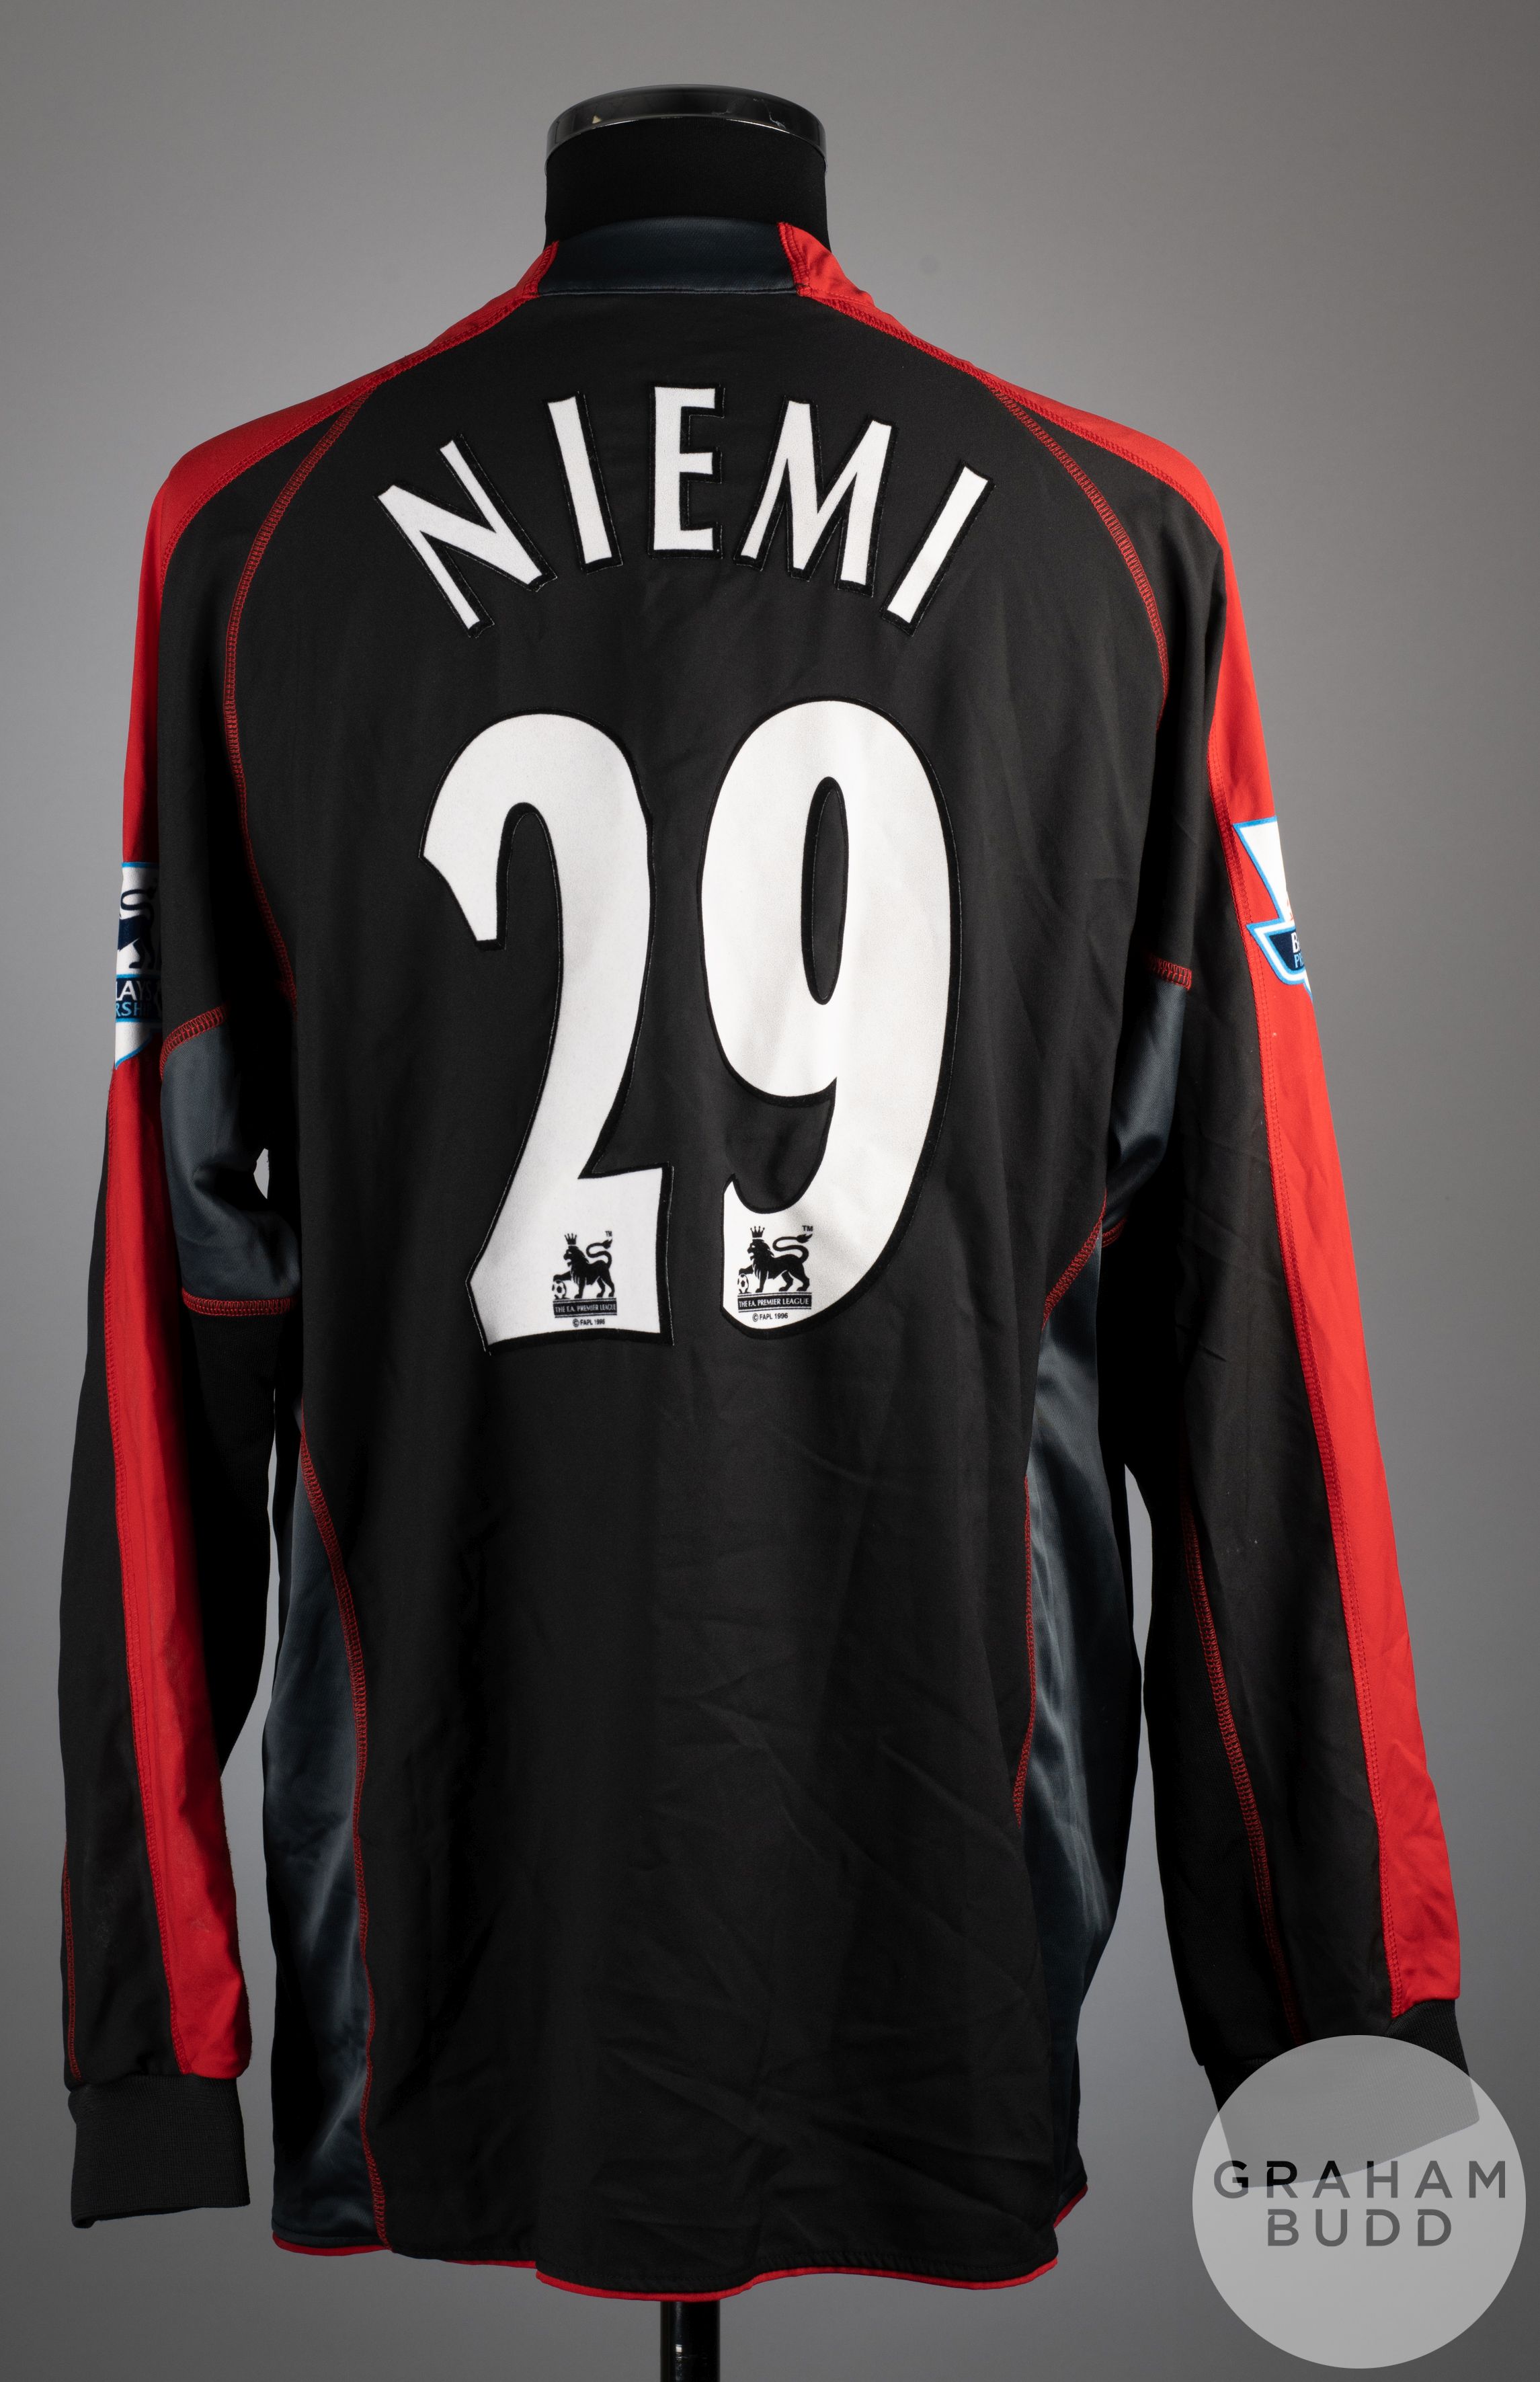 Antti Niemi red and black No.29 Fulham long sleeved goalkeeper shirt, 2007-08 - Image 2 of 2